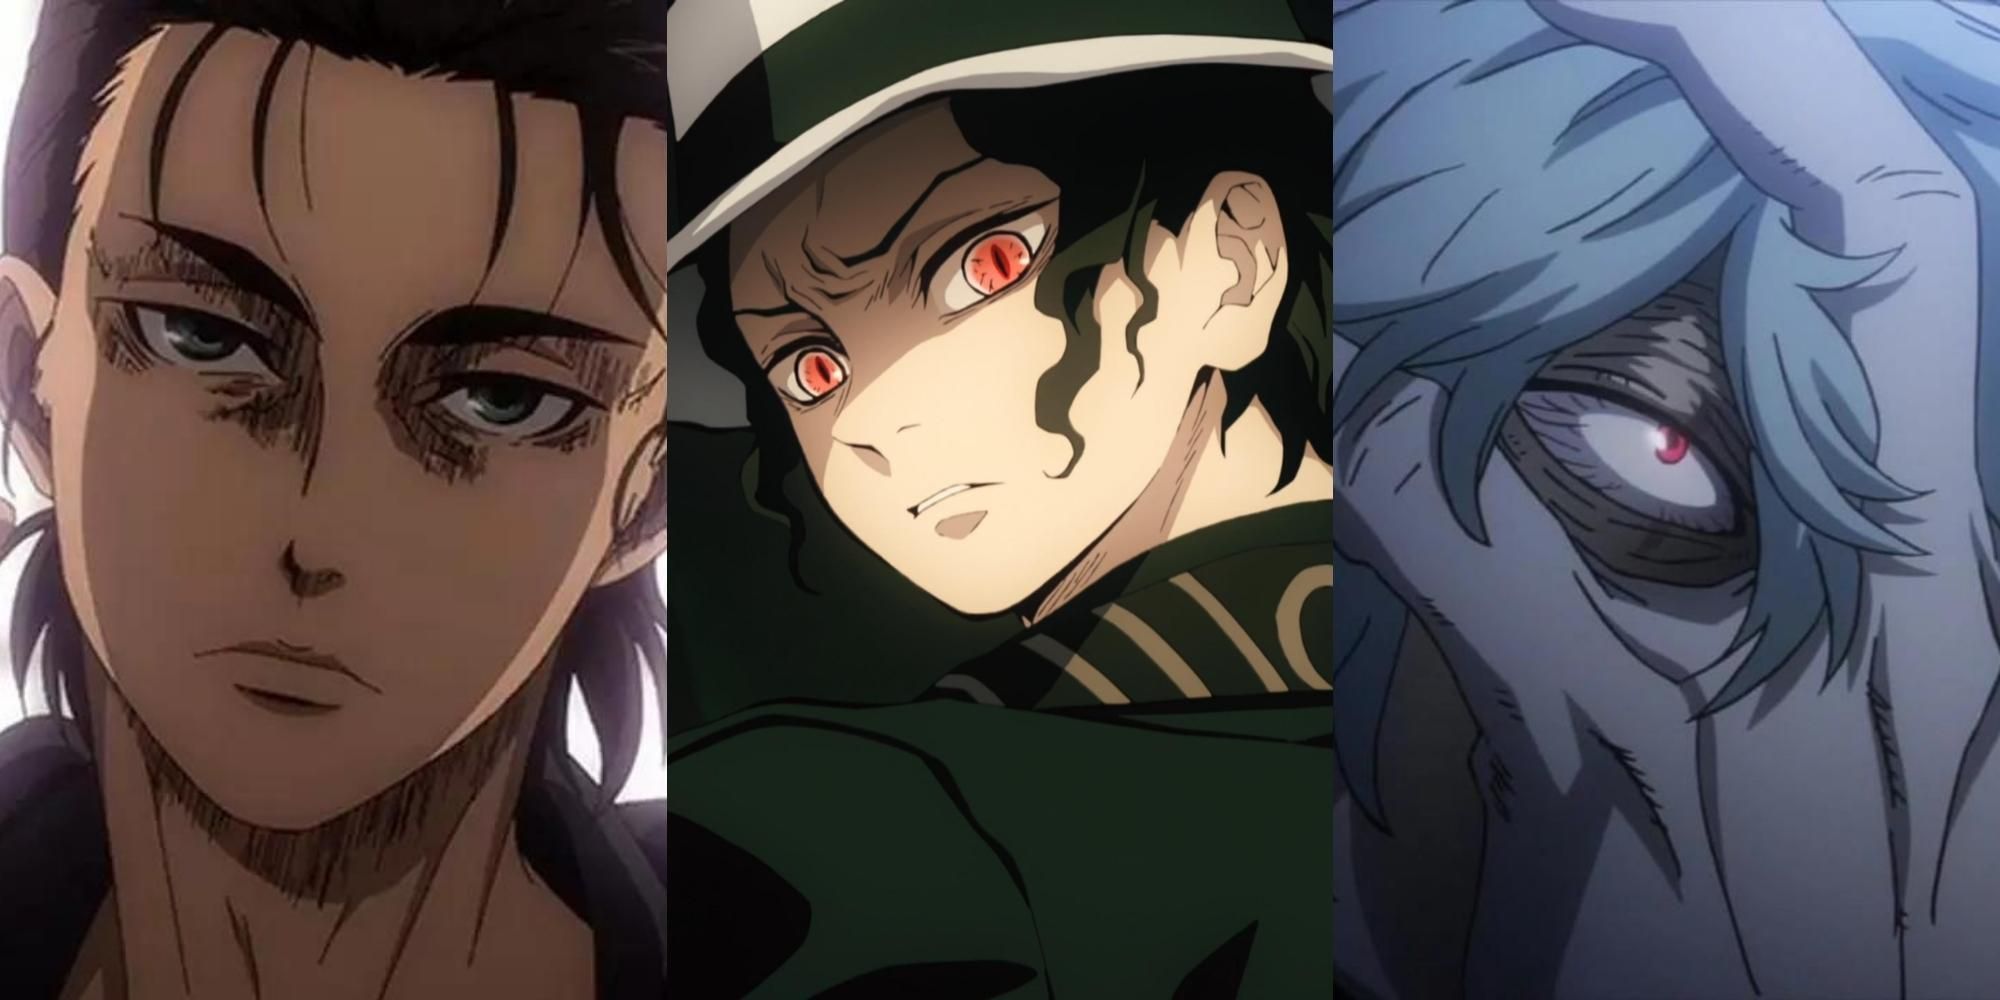 Top 50 Most Popular Female Anime Villains Of All Time